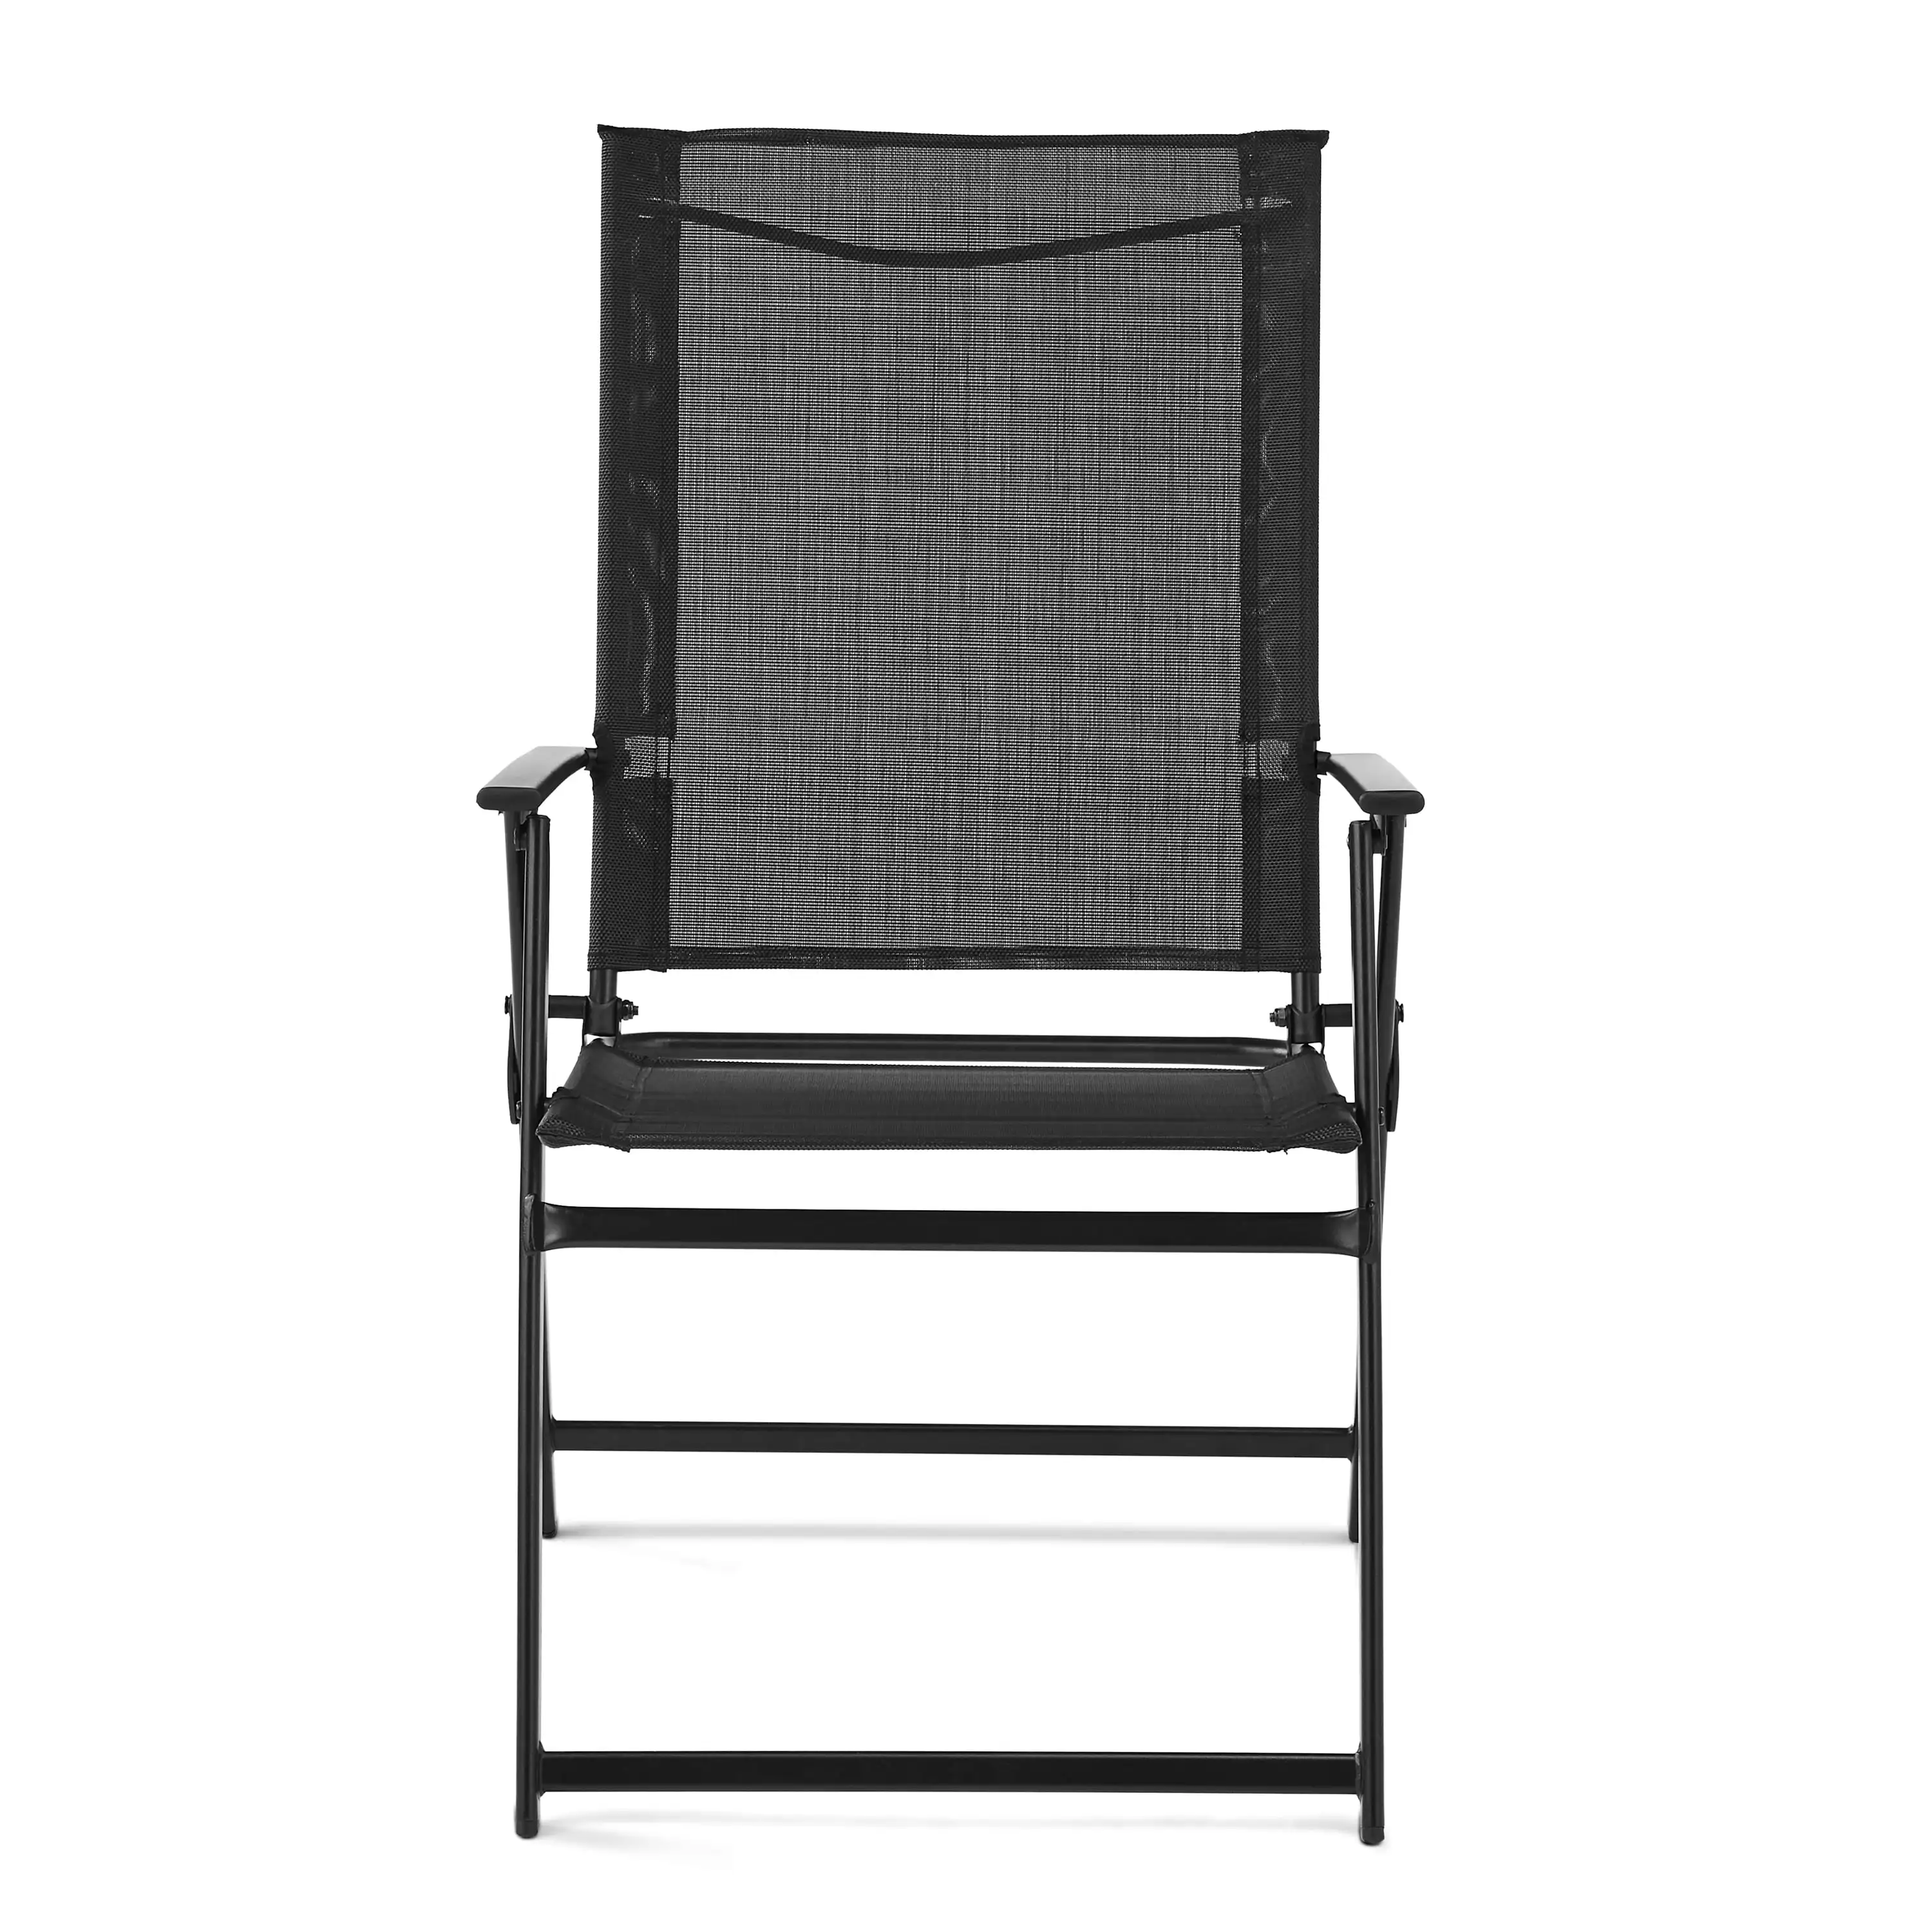 Mainstays Greyson Square Set of 2 Outdoor Patio Steel Sling Folding Chair Black